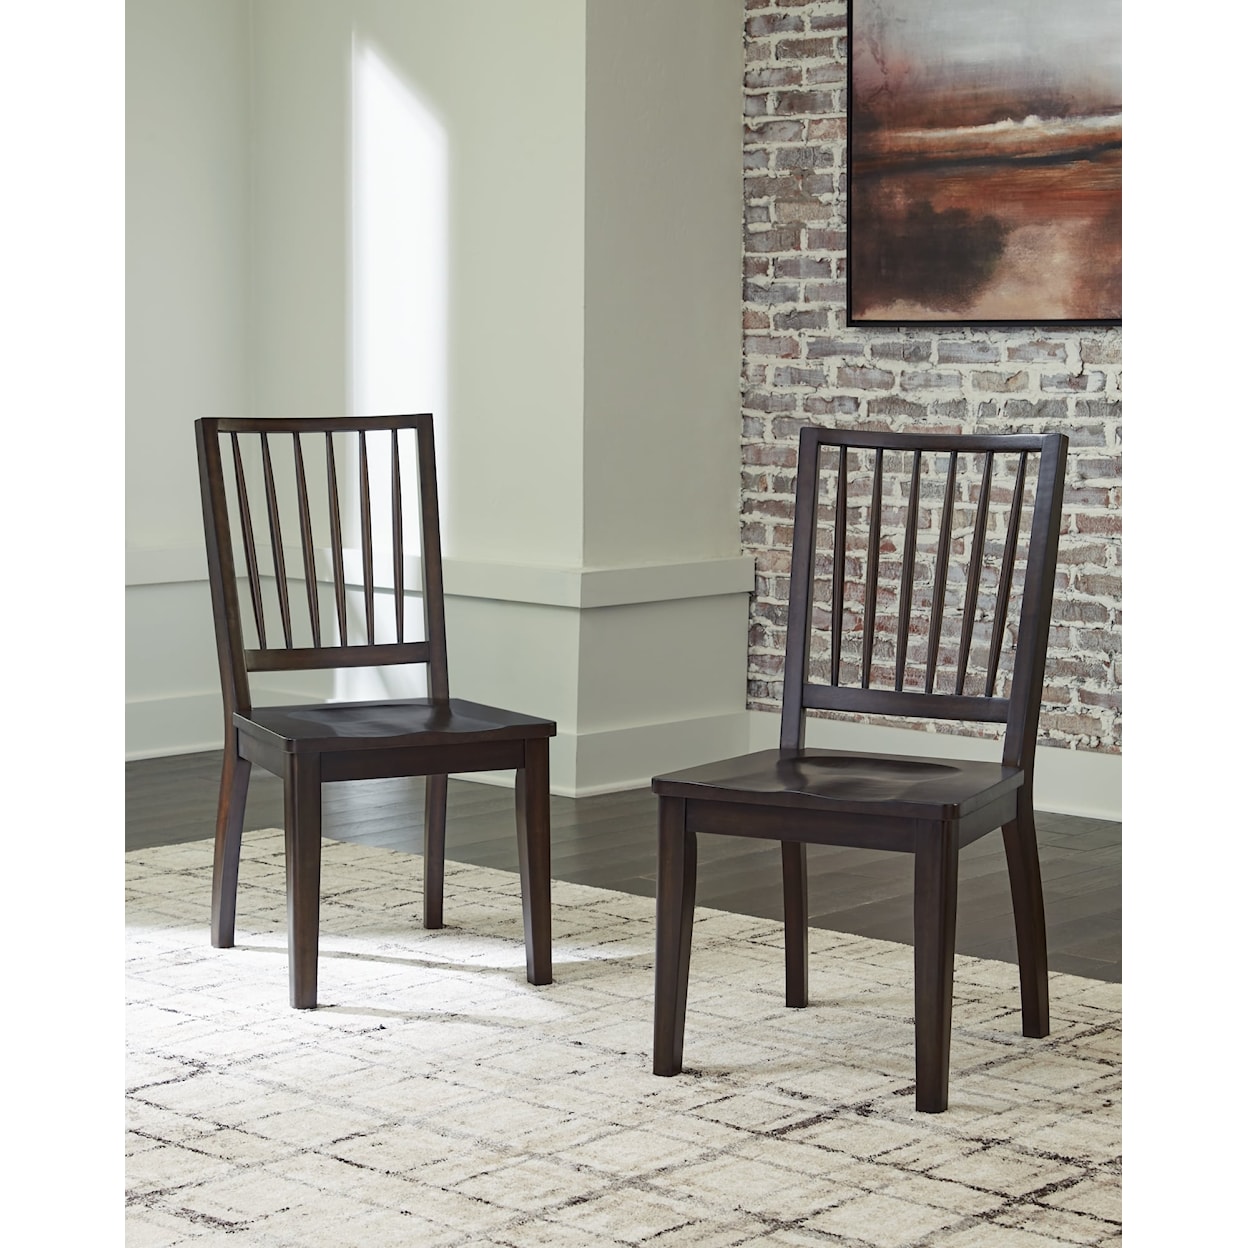 Signature Design Charterton Dining Room Side Chair